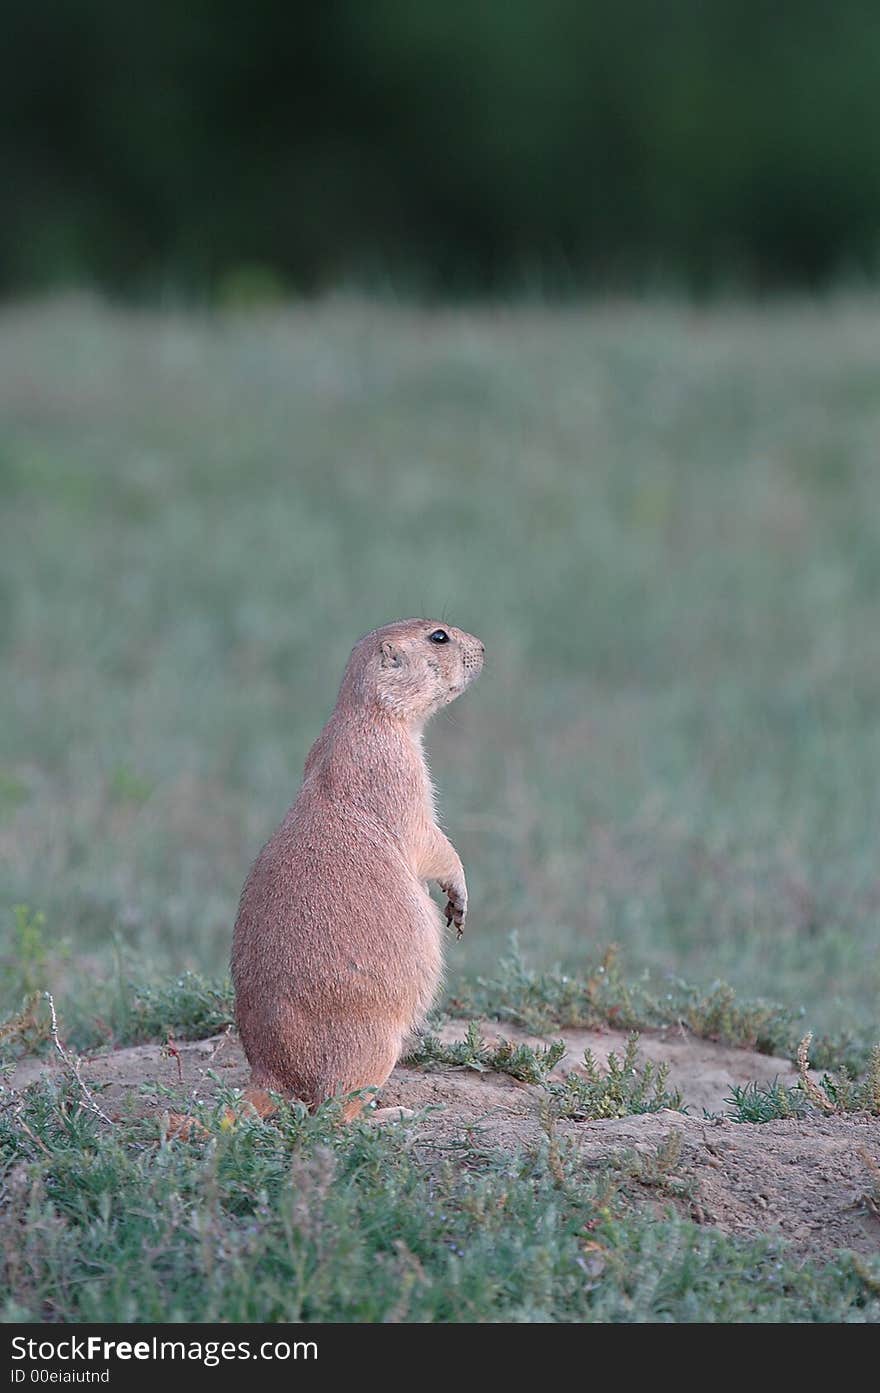 A black-tailed prairie dog stands alert near the entrance to the burrow.